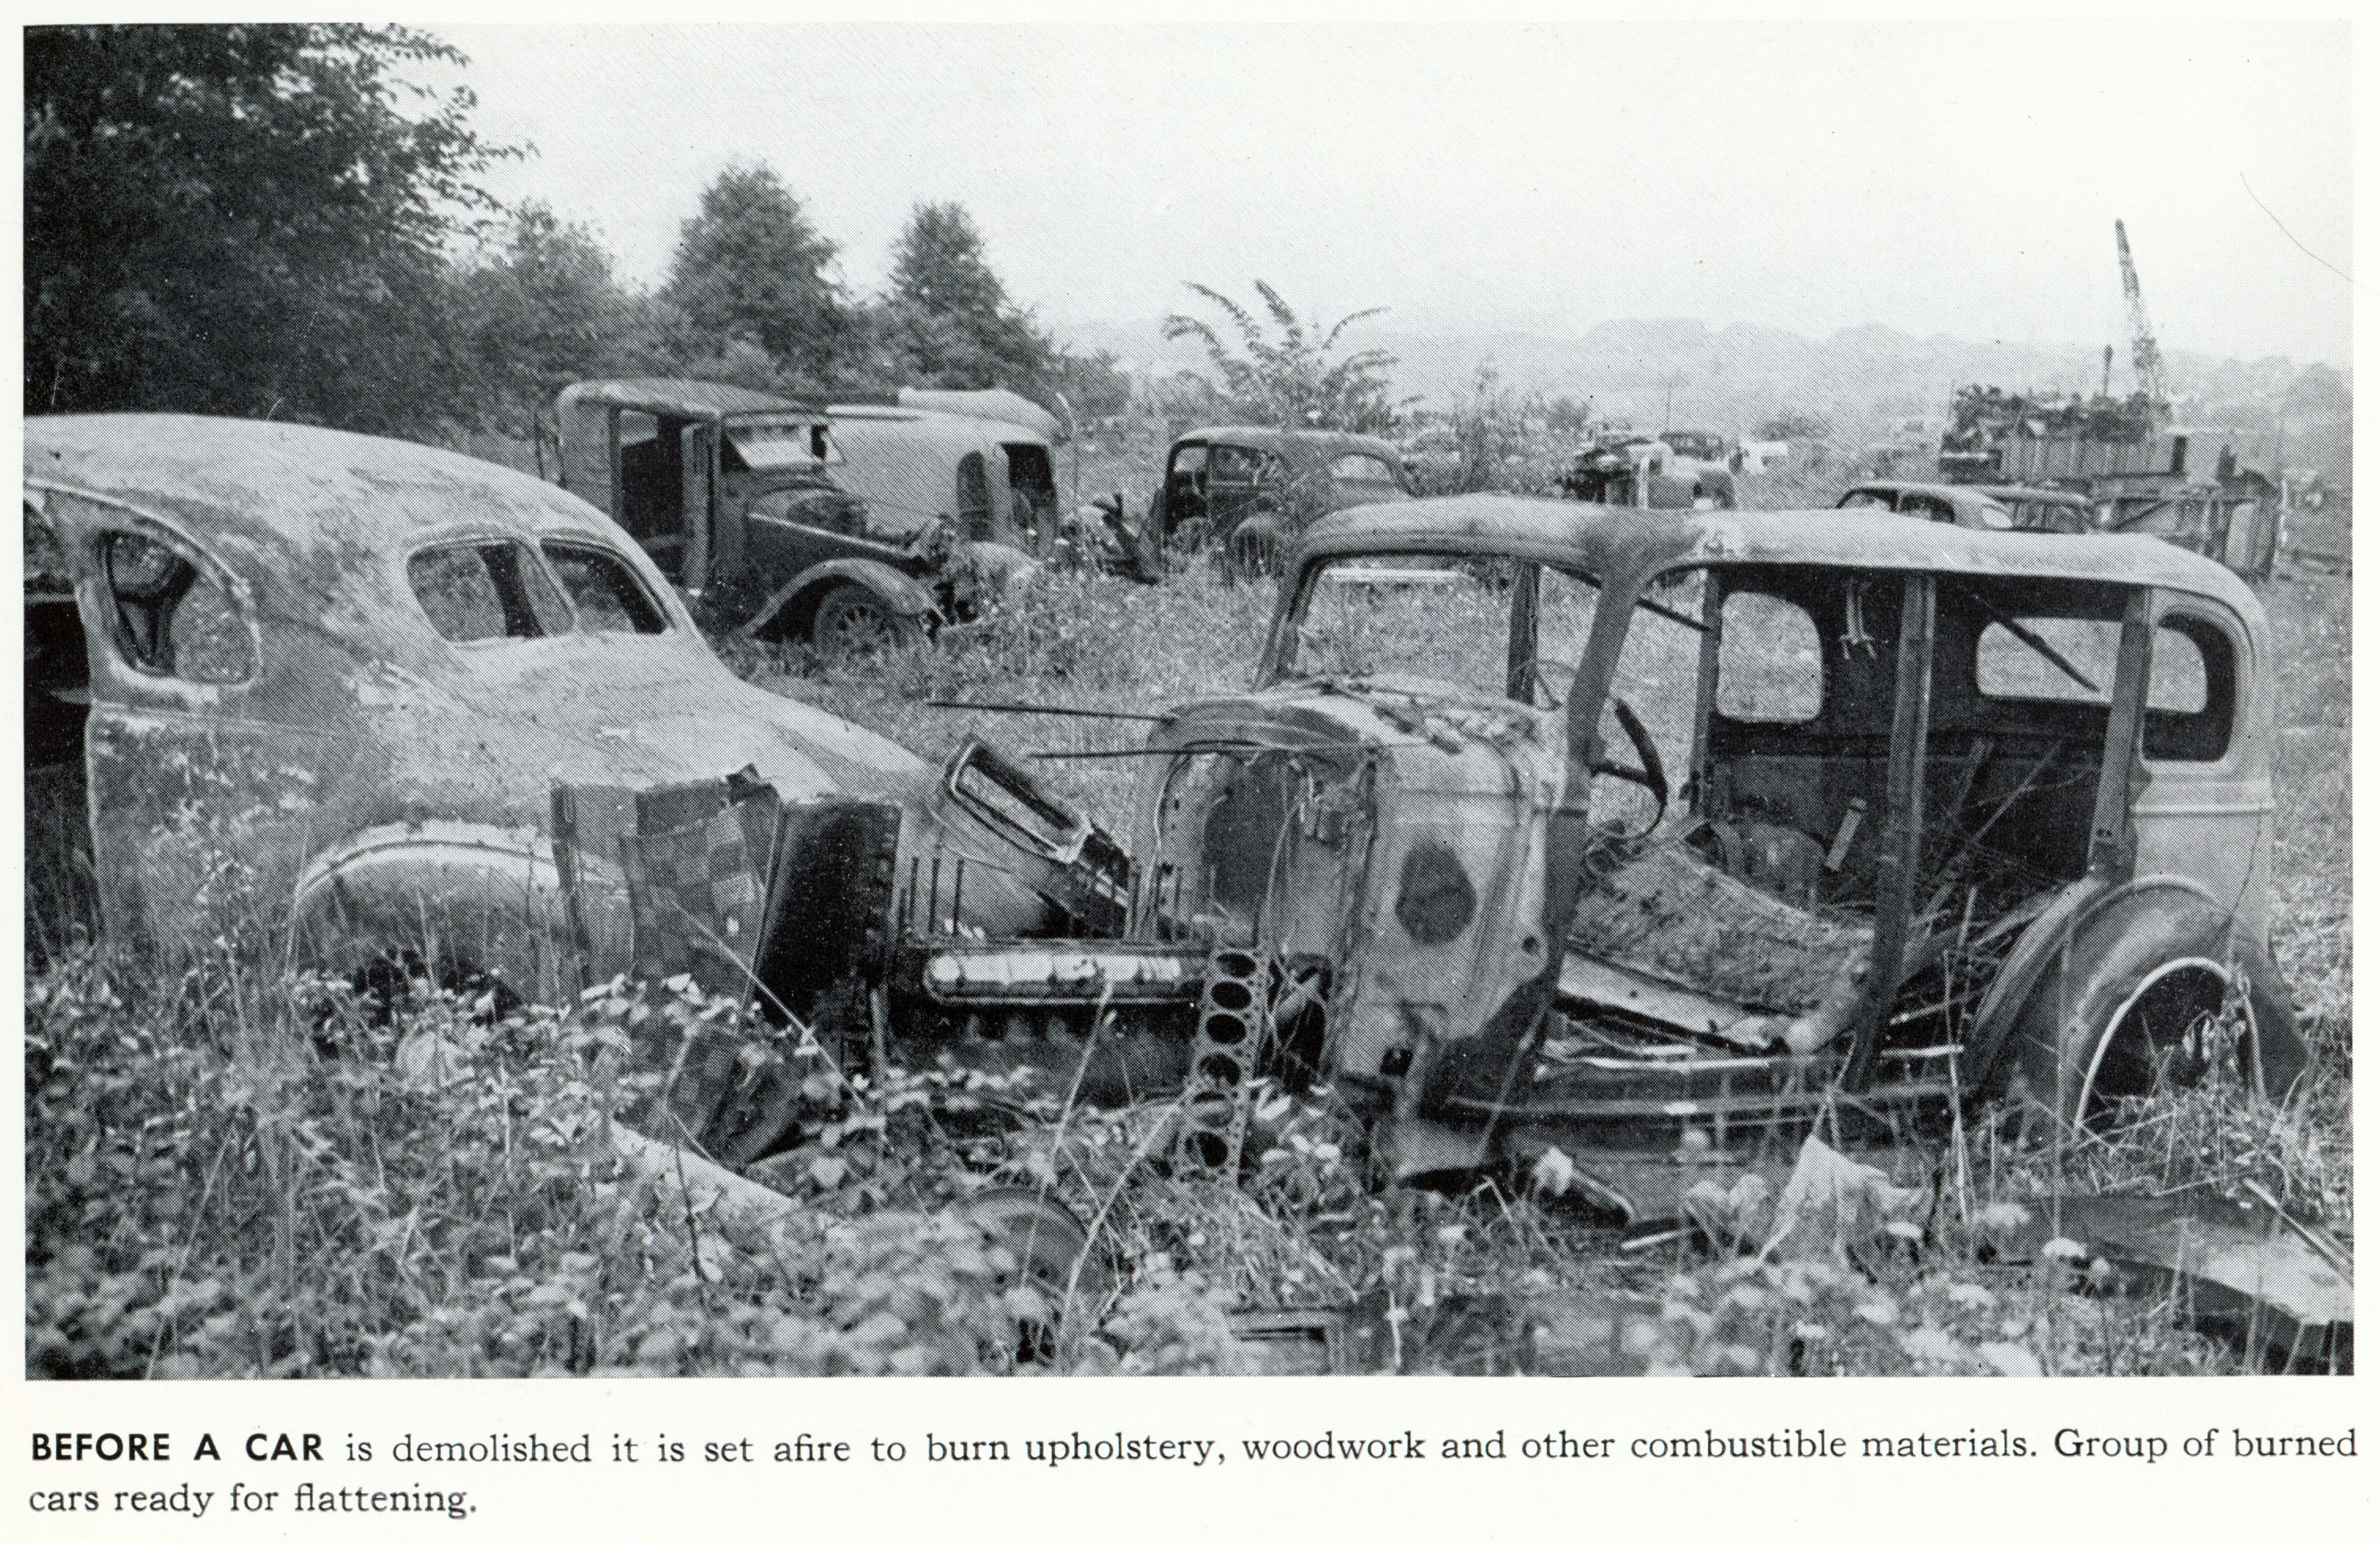 Black and white photograph of scrapped automobiles after being burned.